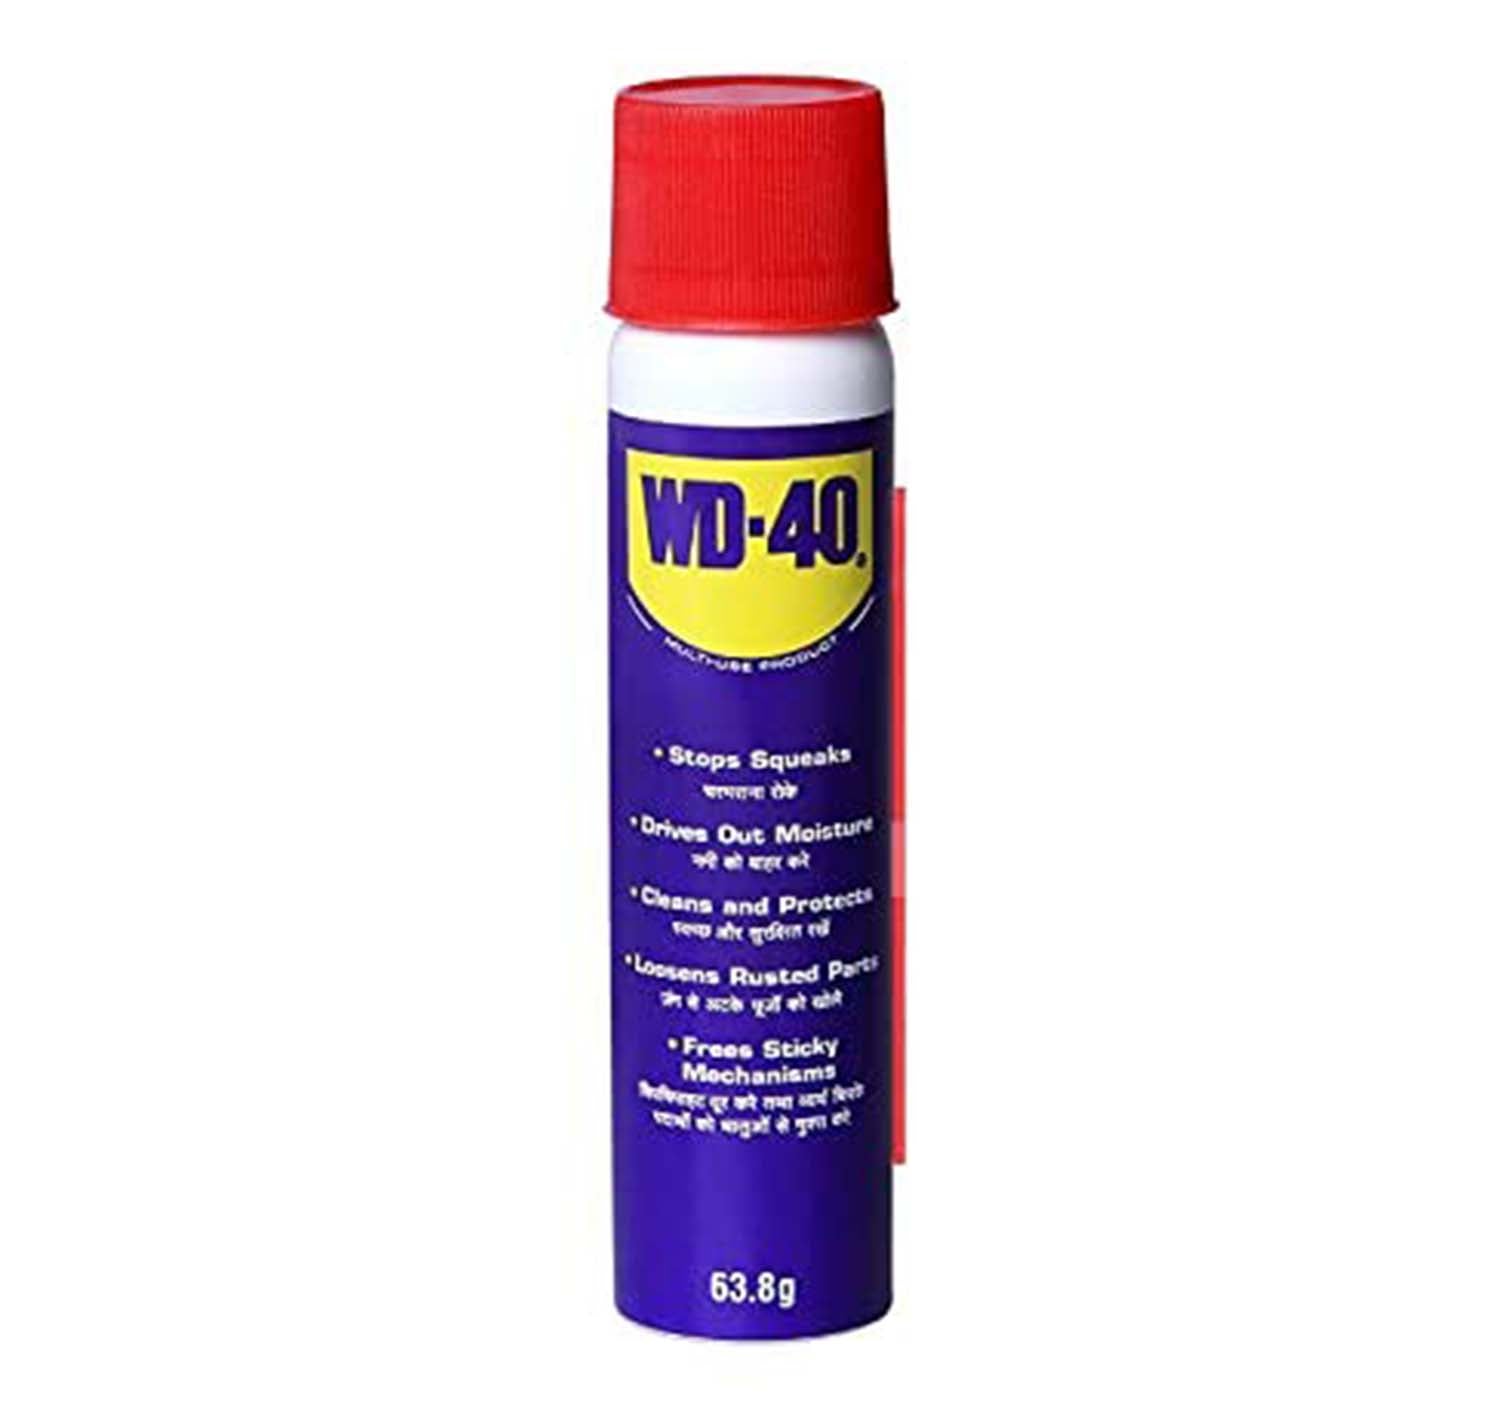 WD-40 Multi-use Lubricant / Rust Removal